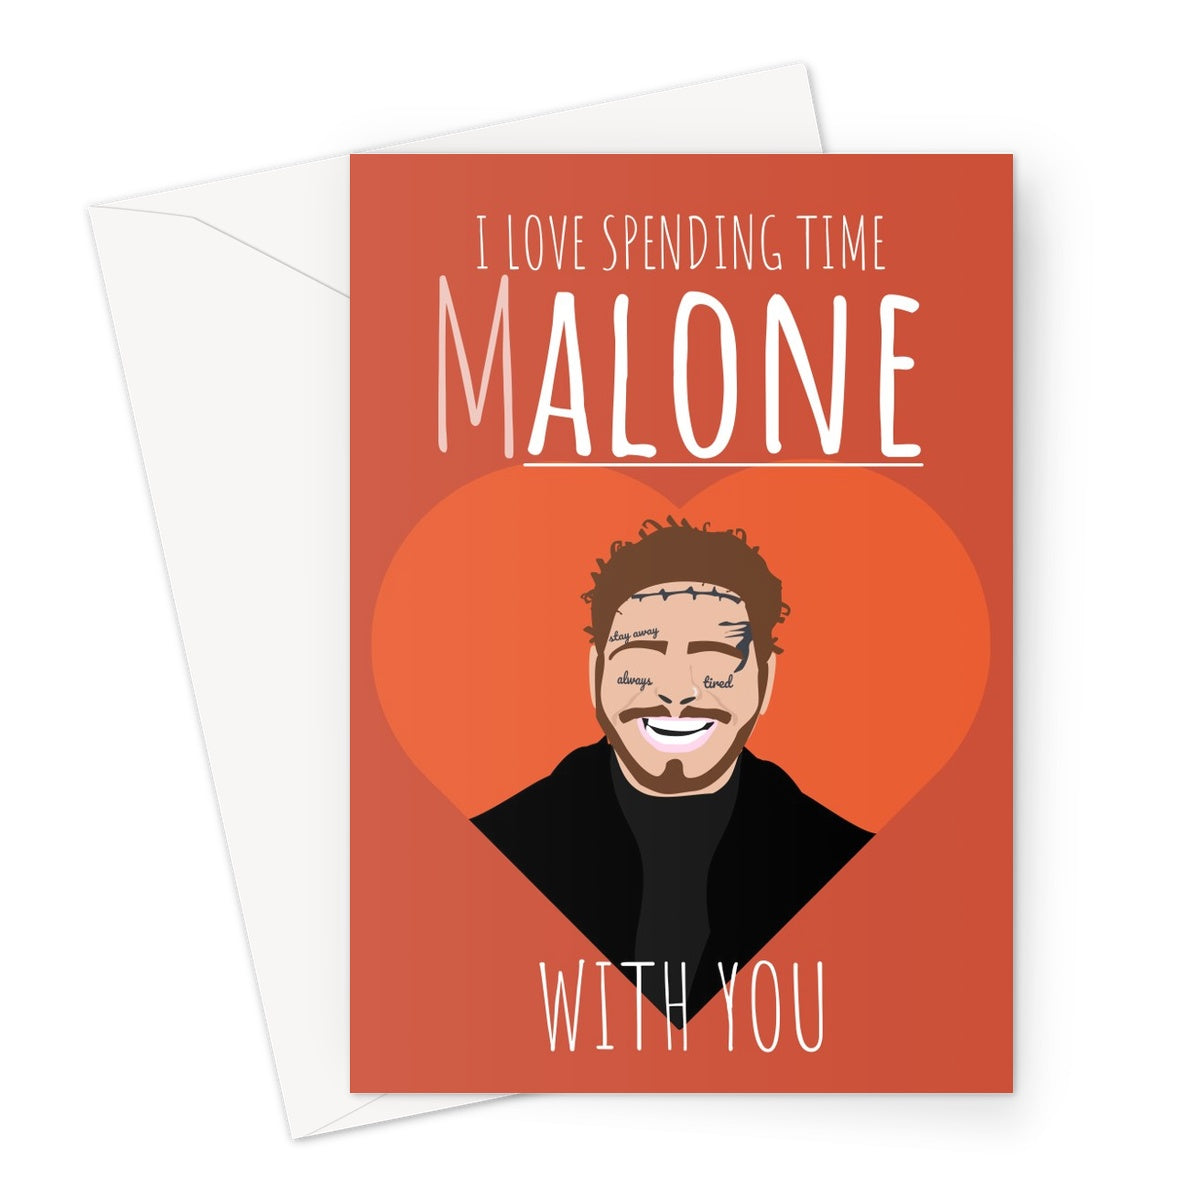 I Love Spending Time Malone With You Post Malone Fan Funny Celebrity Music Alone Anniversary Love Birthday Greeting Card